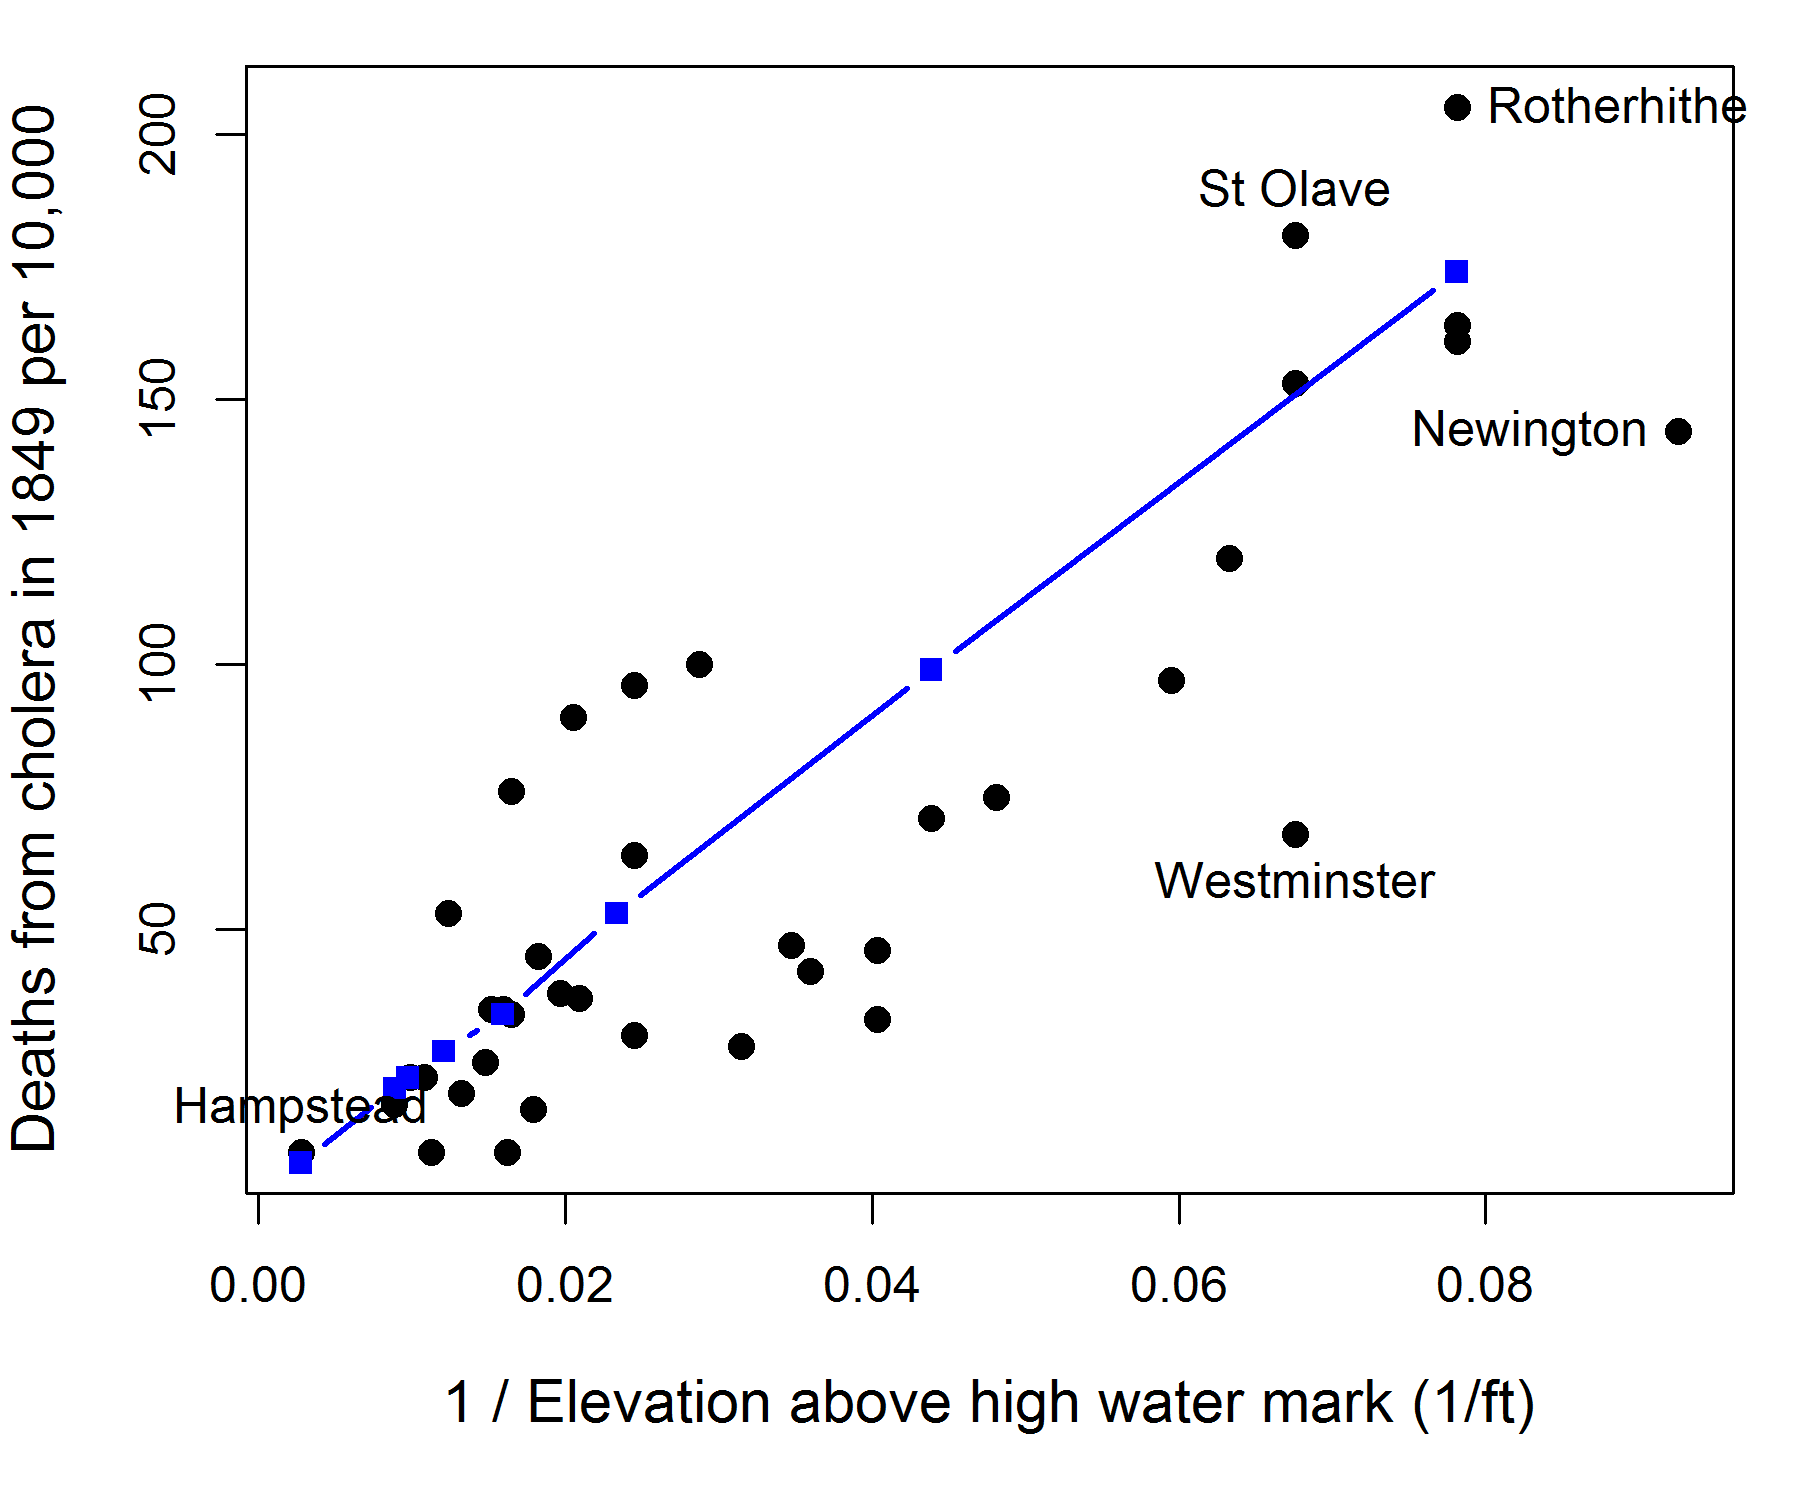 Inverse elevation plot: Plot of Farr’s data, with elevation reexpressed as 1/(E+a). The predicted values from his theory are now shown to form a highly linear relation to cholera mortality in the solid curve.